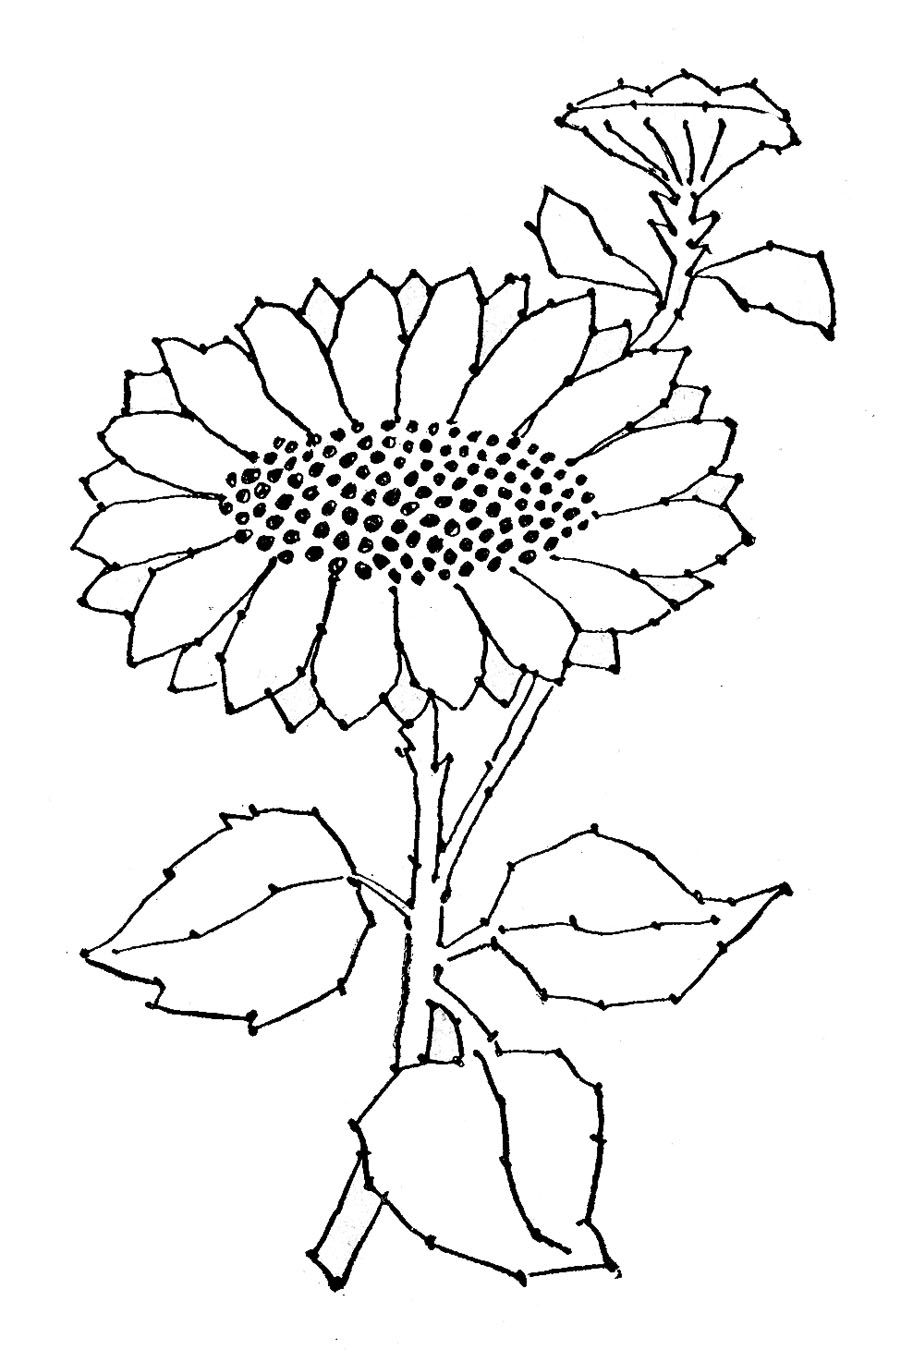 Free Black Sunflower Cliparts, Download Free Clip Art, Free.